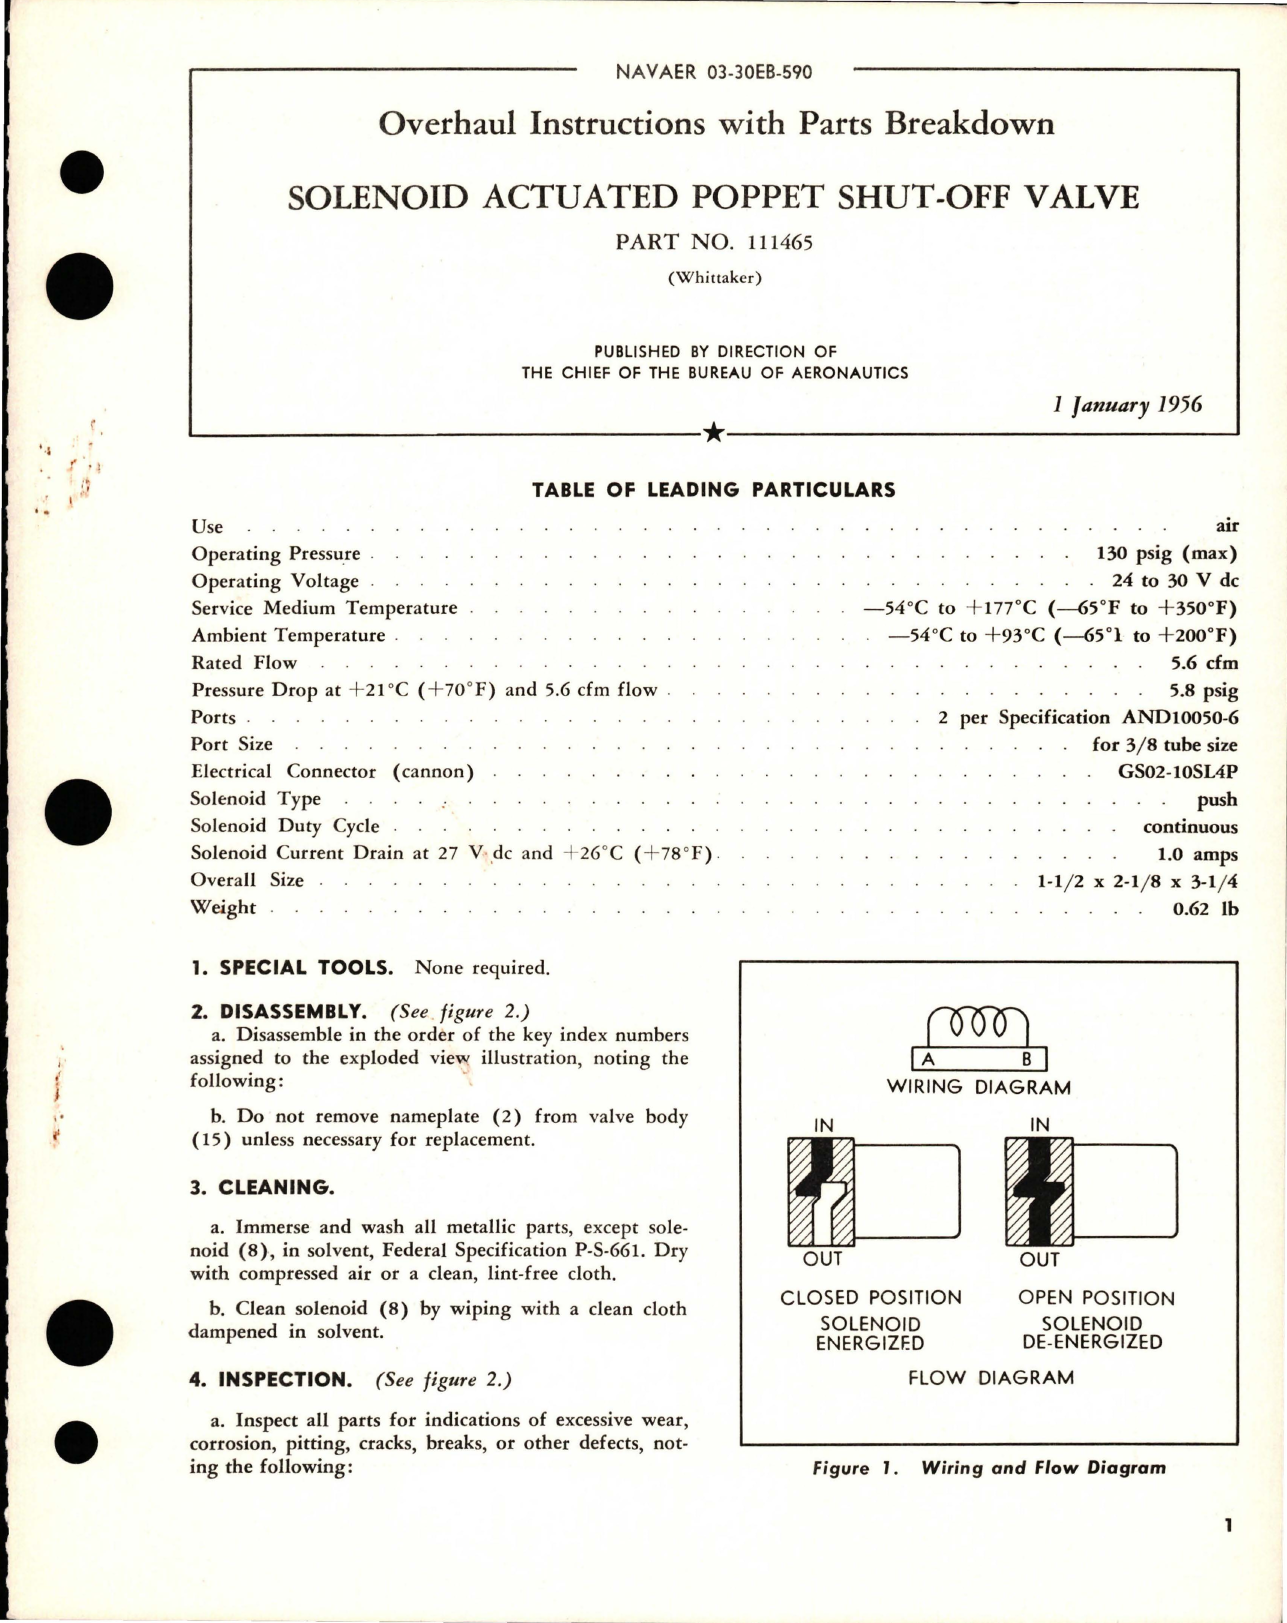 Sample page 1 from AirCorps Library document: Overhaul Instructions with Parts Breakdown for Solenoid Actuated Poppet Shut-Off Valve - Part 111465